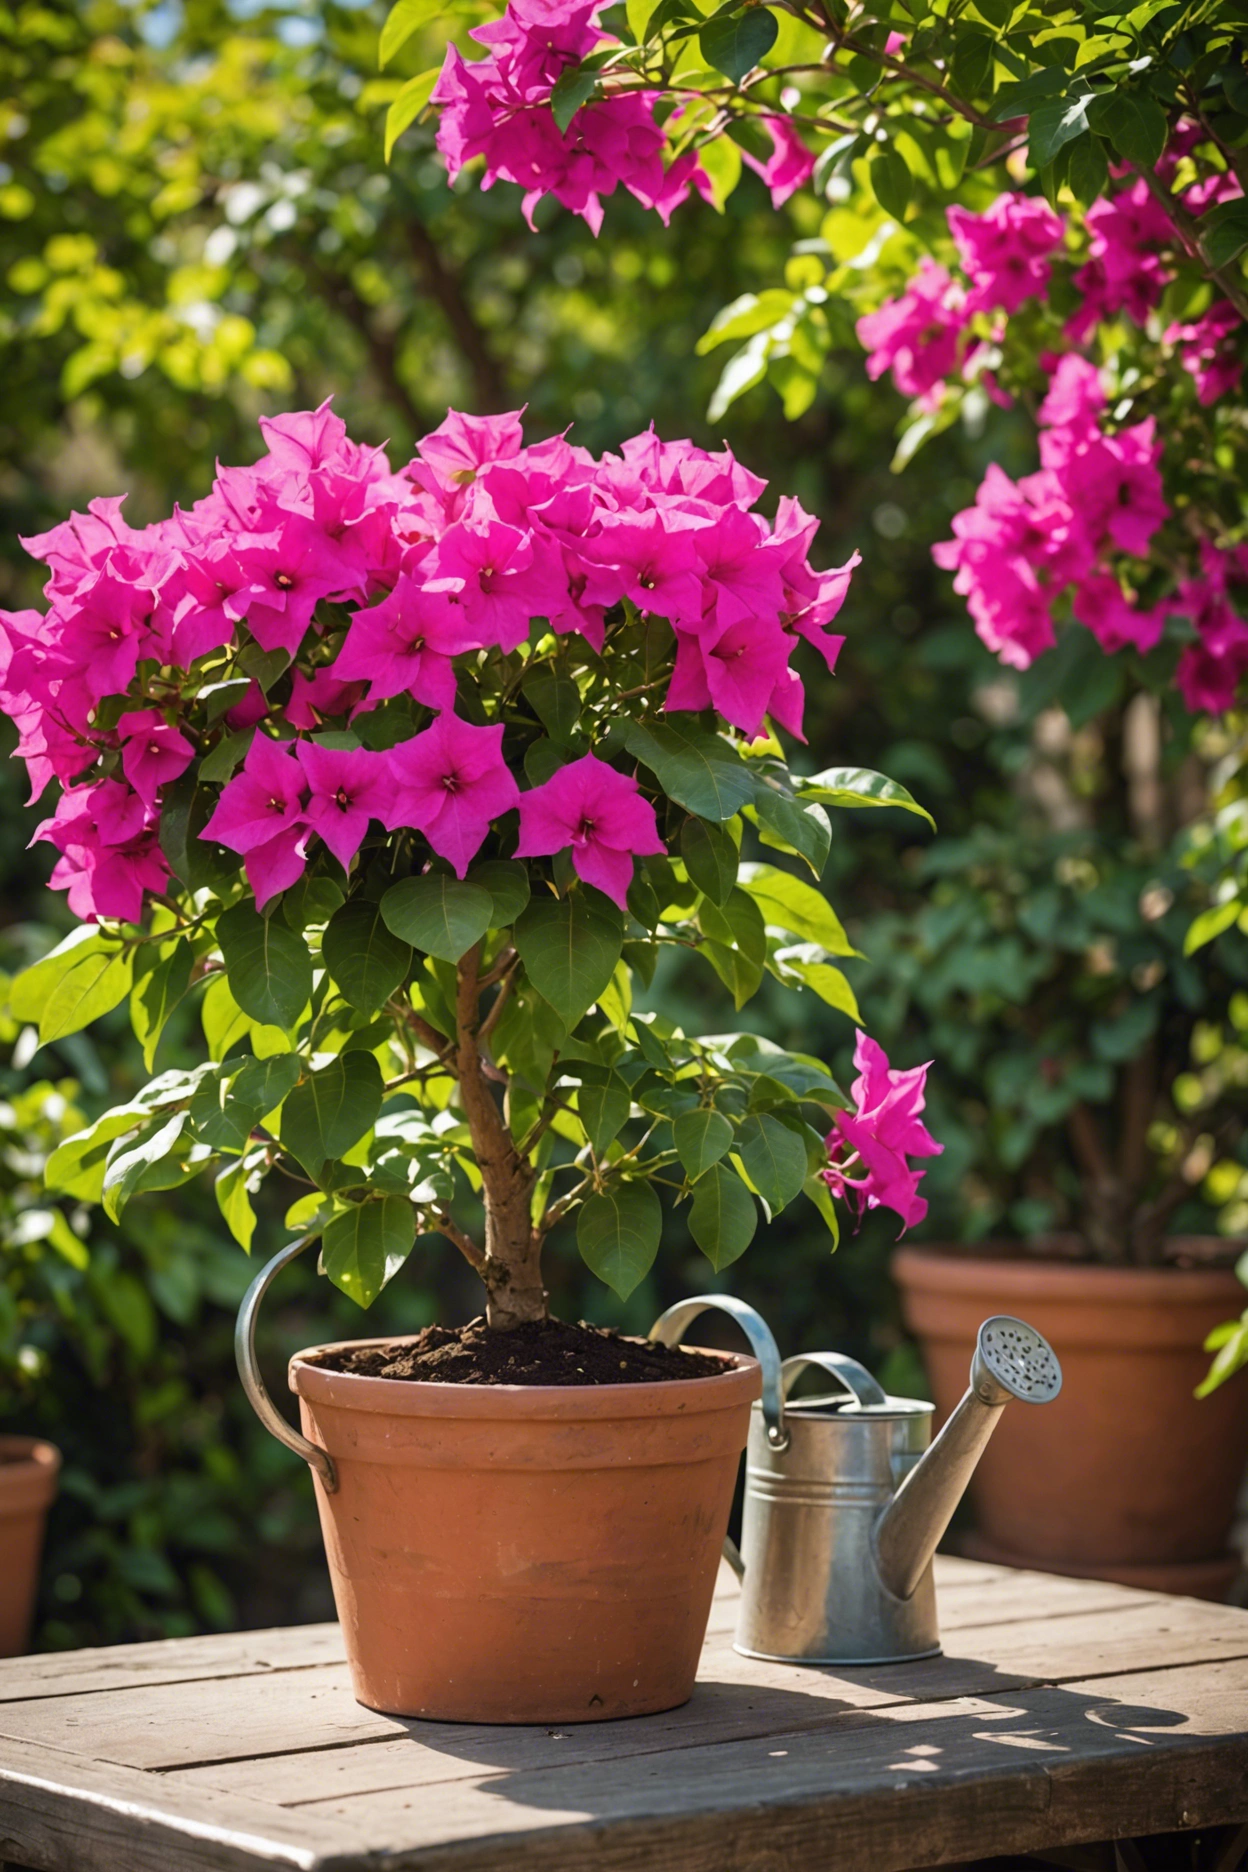 "Bright bougainvillea plant in a clay pot on a garden table, with a watering can nearby, under sunny outdoor conditions."